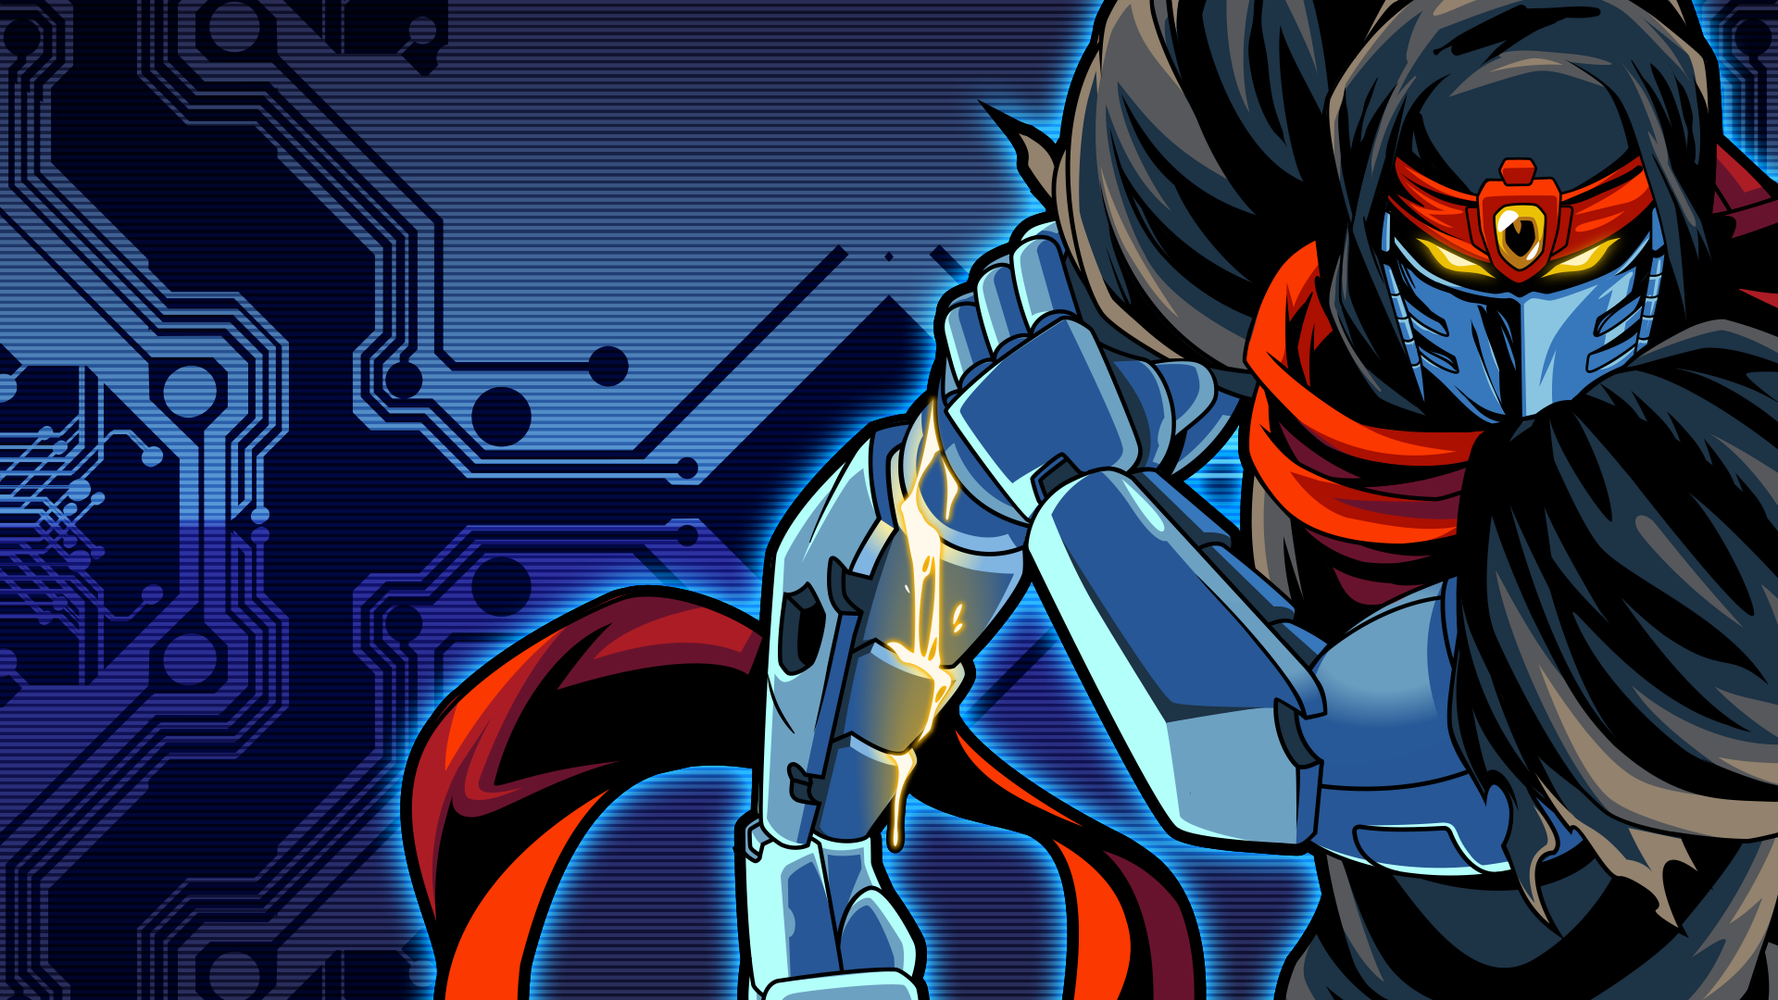 Cyber Shadow background image